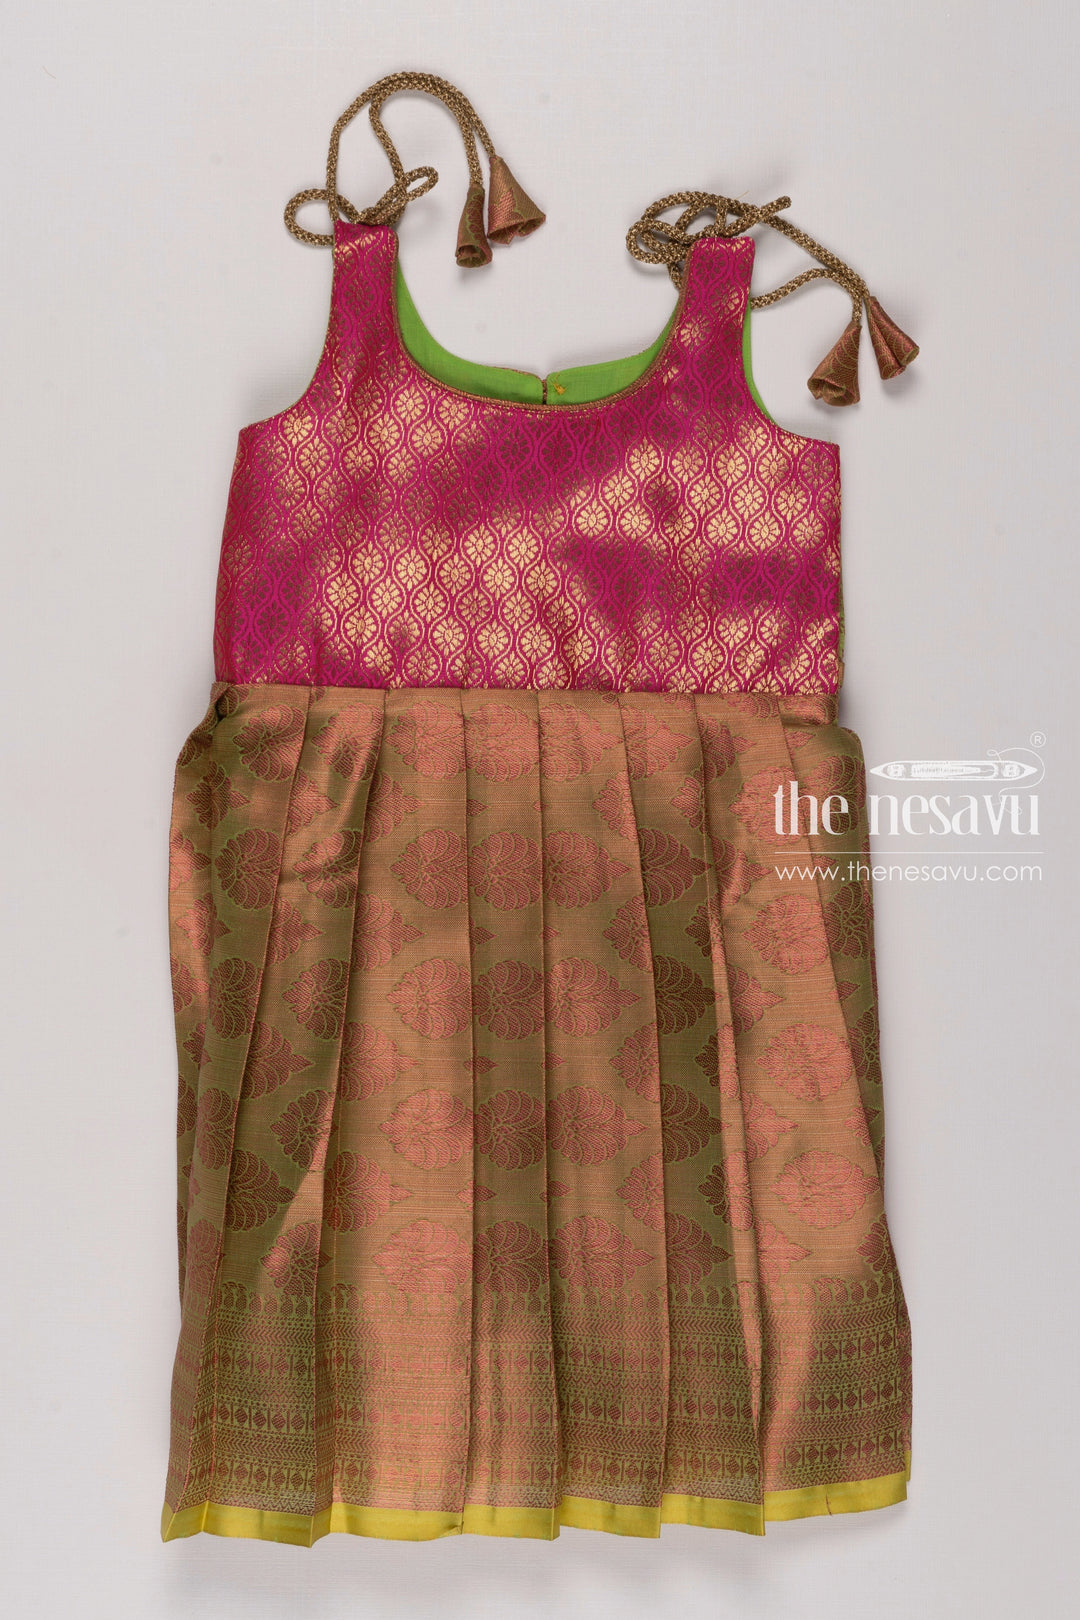 The Nesavu Tie-up Frock Vibrant Olive Green Silk TieUp Dress | Designer Frock with Traditional Patterns Nesavu 16 (1Y) / Green / Blend Silk T293A-16 Pink Olive Green Silk Frock | Traditional Party Dress with Golden Accents | The Nesavu